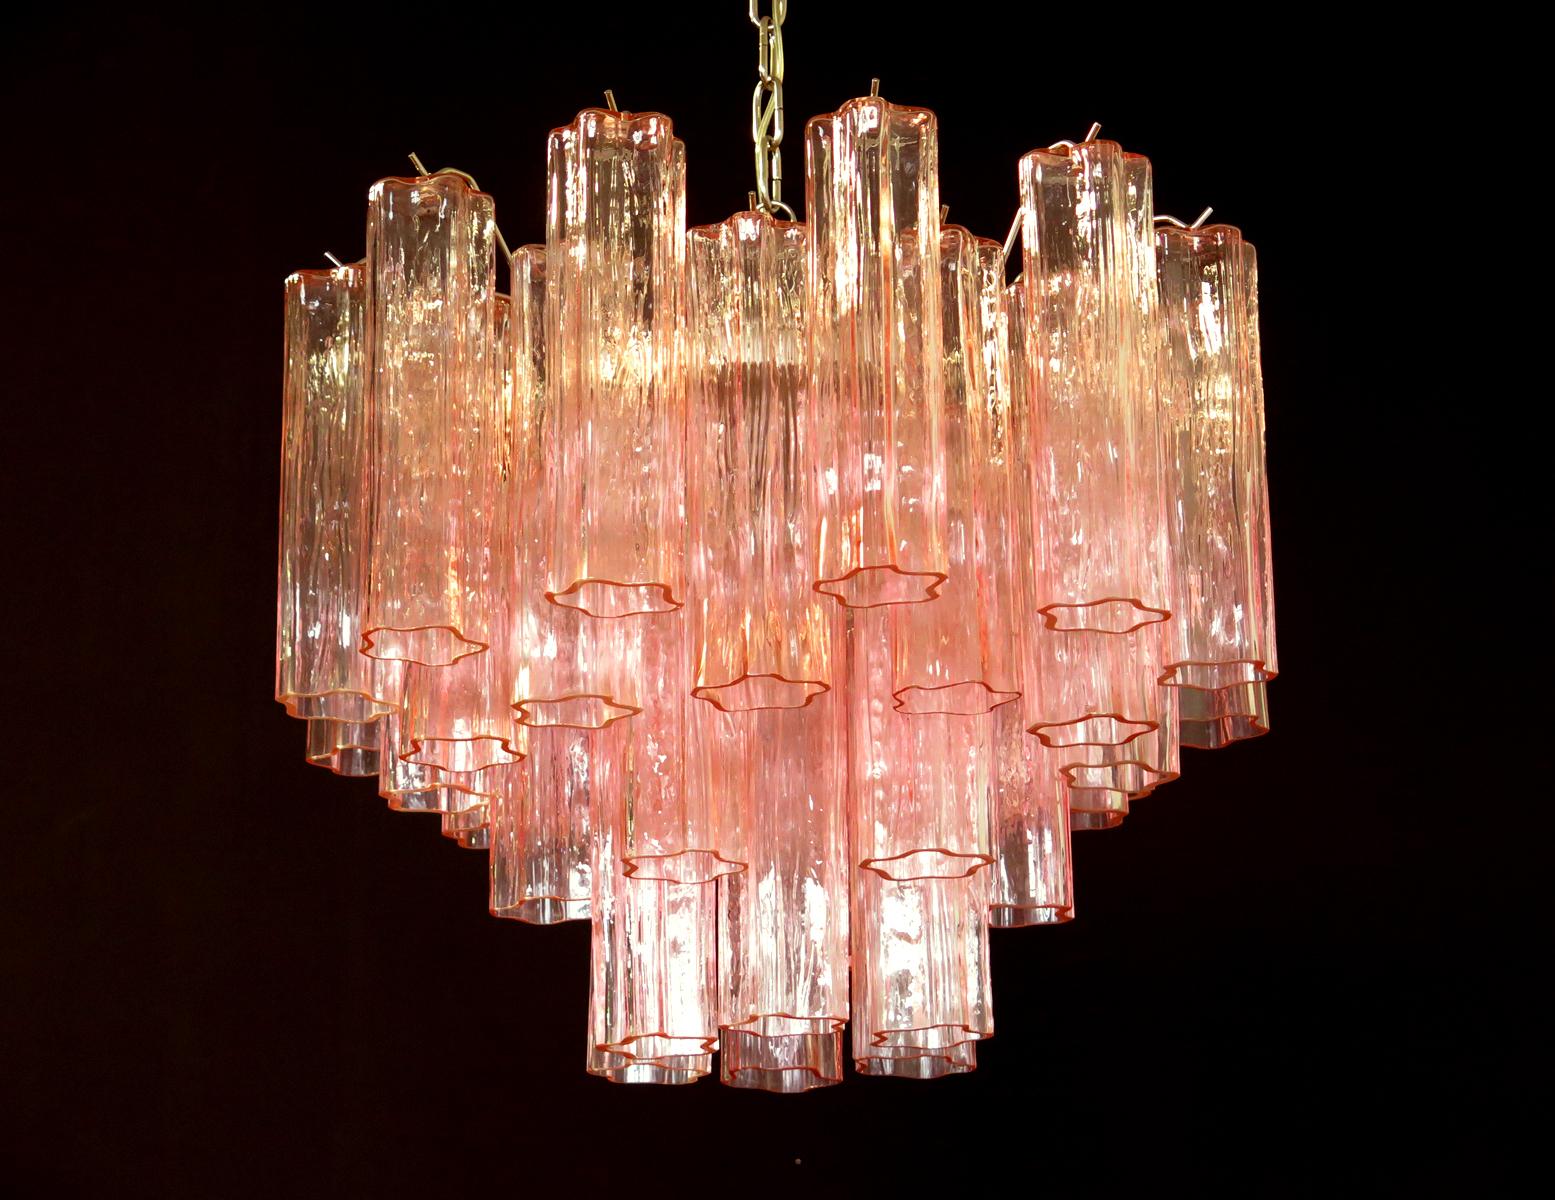 Four Tronchi Chandeliers Style Toni Zuccheri, 36 Pink Glasses, Murano, 1990 For Sale 5